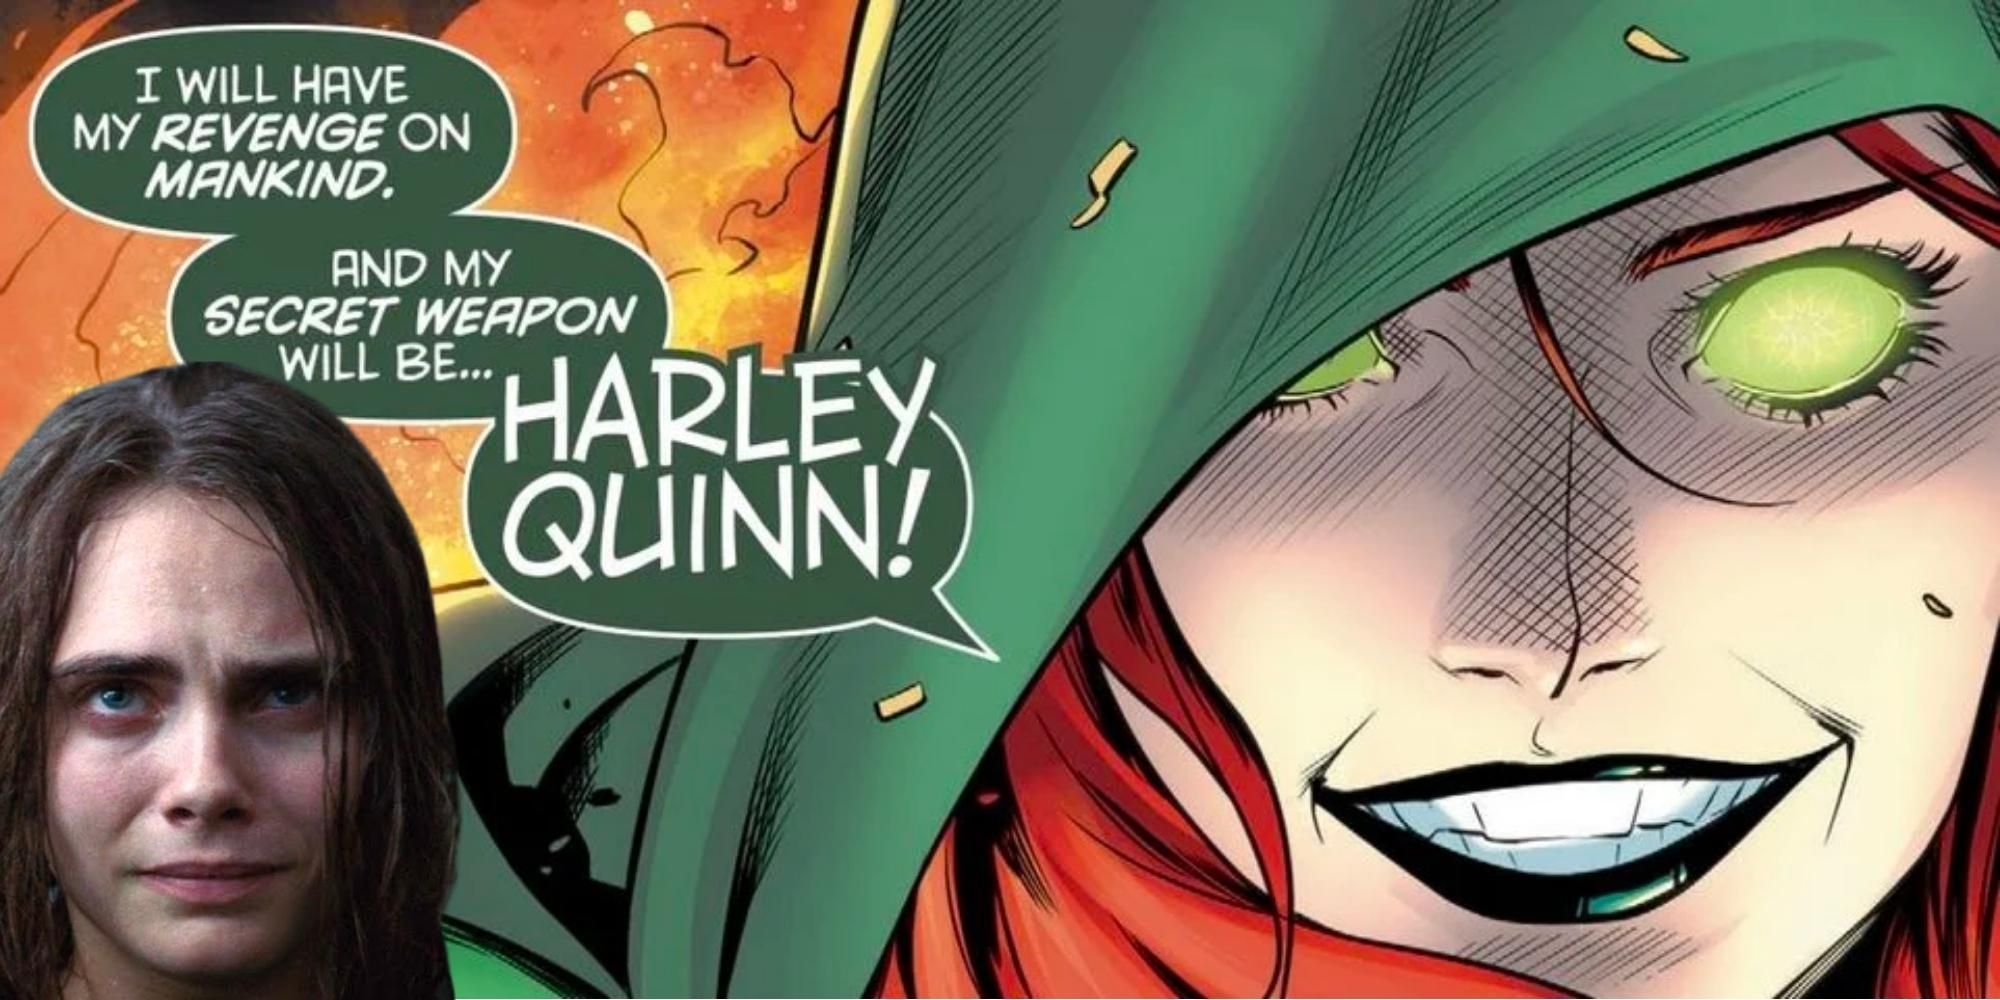 DC villain Enchantress as she appears in the comic books, with a green hood and red hair, Cara Delevigne looking sad in an image from Suicide Squad movie 